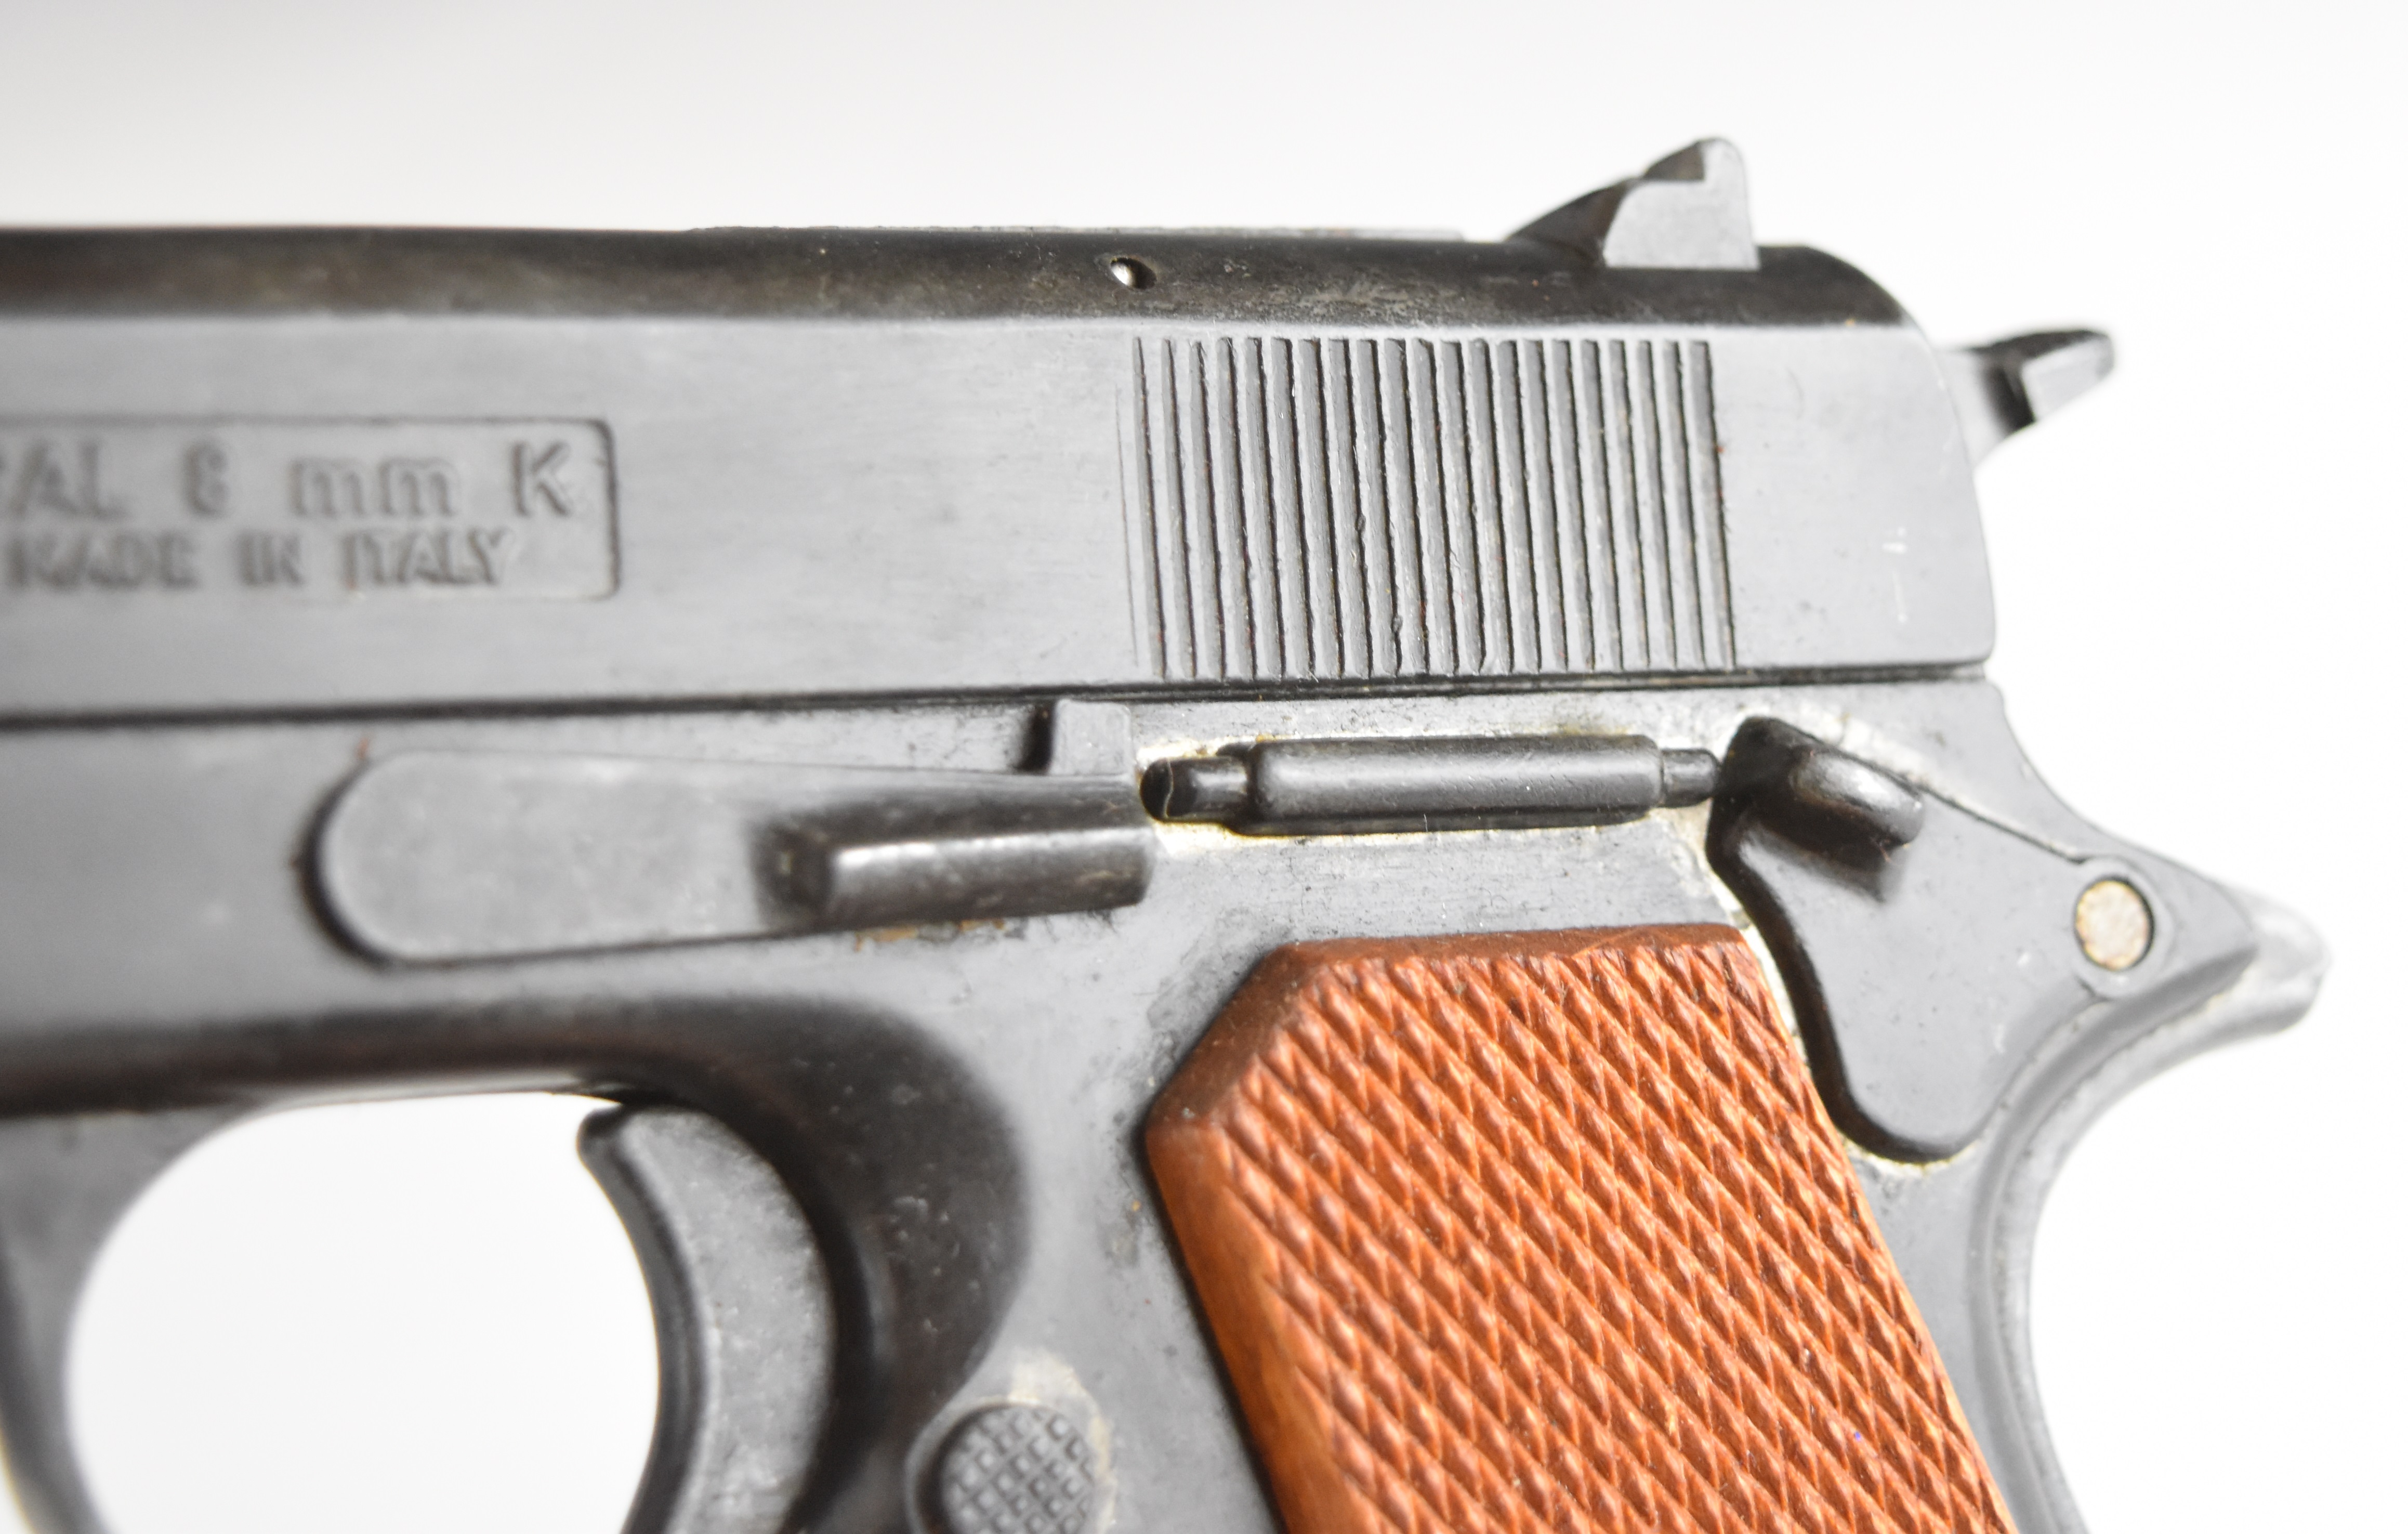 BBM Bruni 8mm blank firing pistol with chequered wooden grips, in original fitted box. - Image 10 of 14